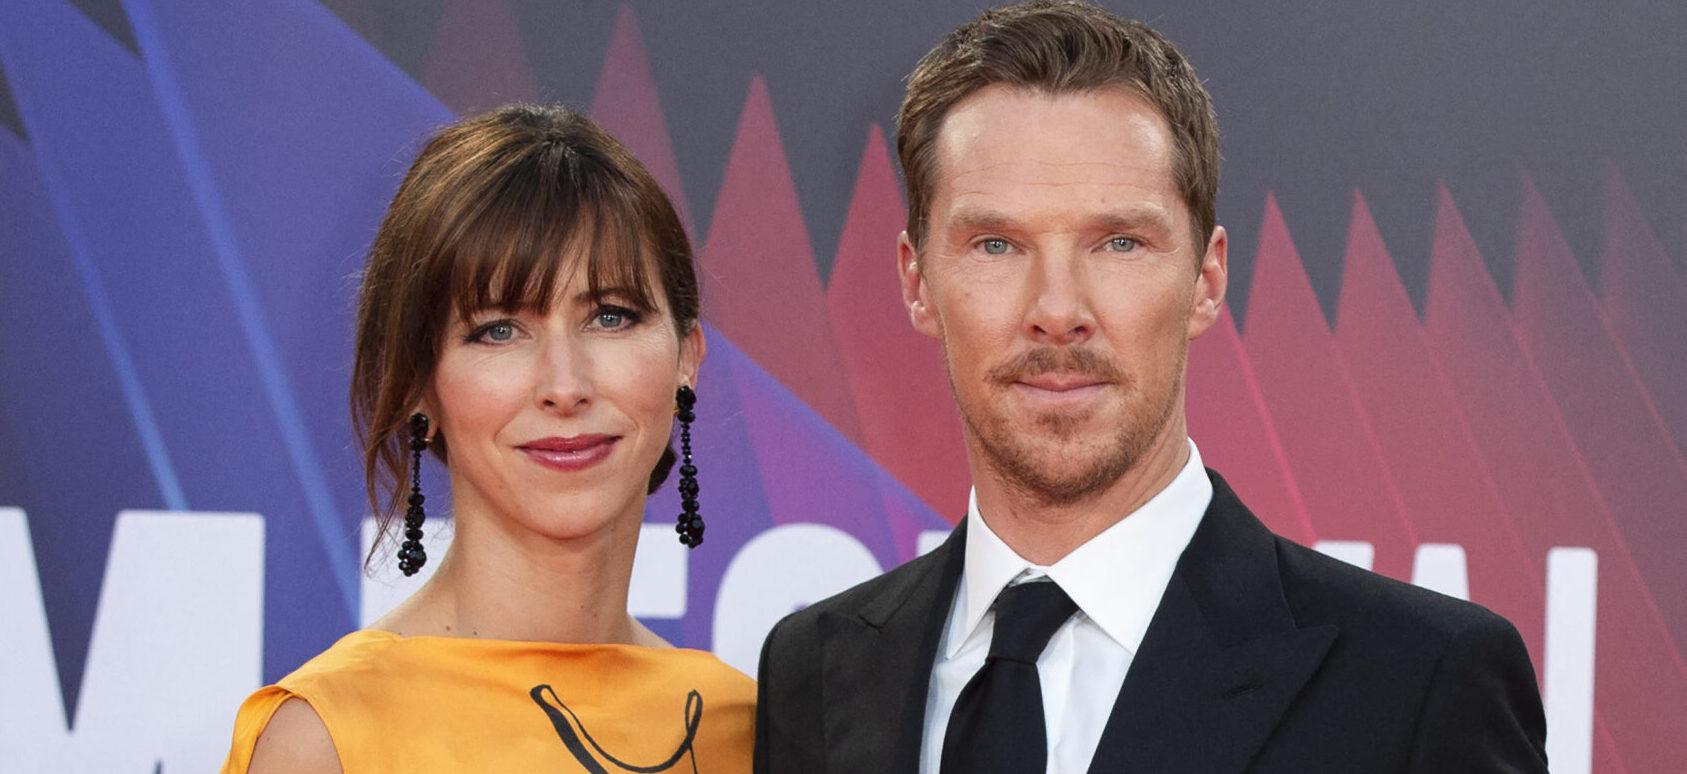 Benedict Cumberbatch’s London Home Invaded By Knife-Wielding Chef